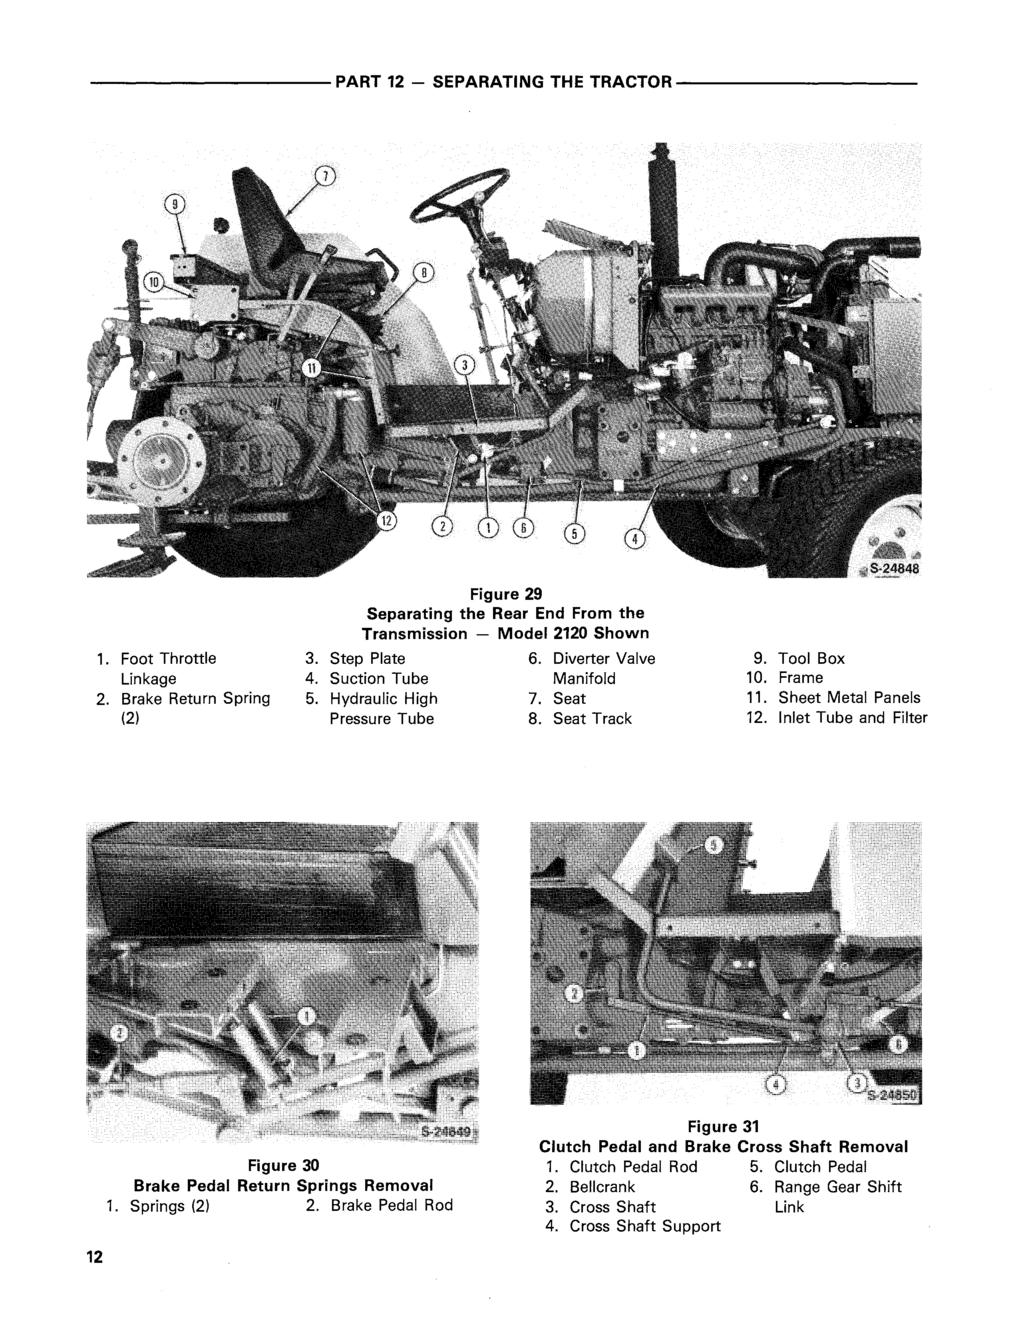 ----------PART 12 - SEPARATING THE TRACTOR---------- Figure 29 Separating the Rear End From the Transmission - Model 2120 Shown 1. Foot Throttle 3. Step Plate 6. Diverter Valve 9. Tool Box Linkage 4.